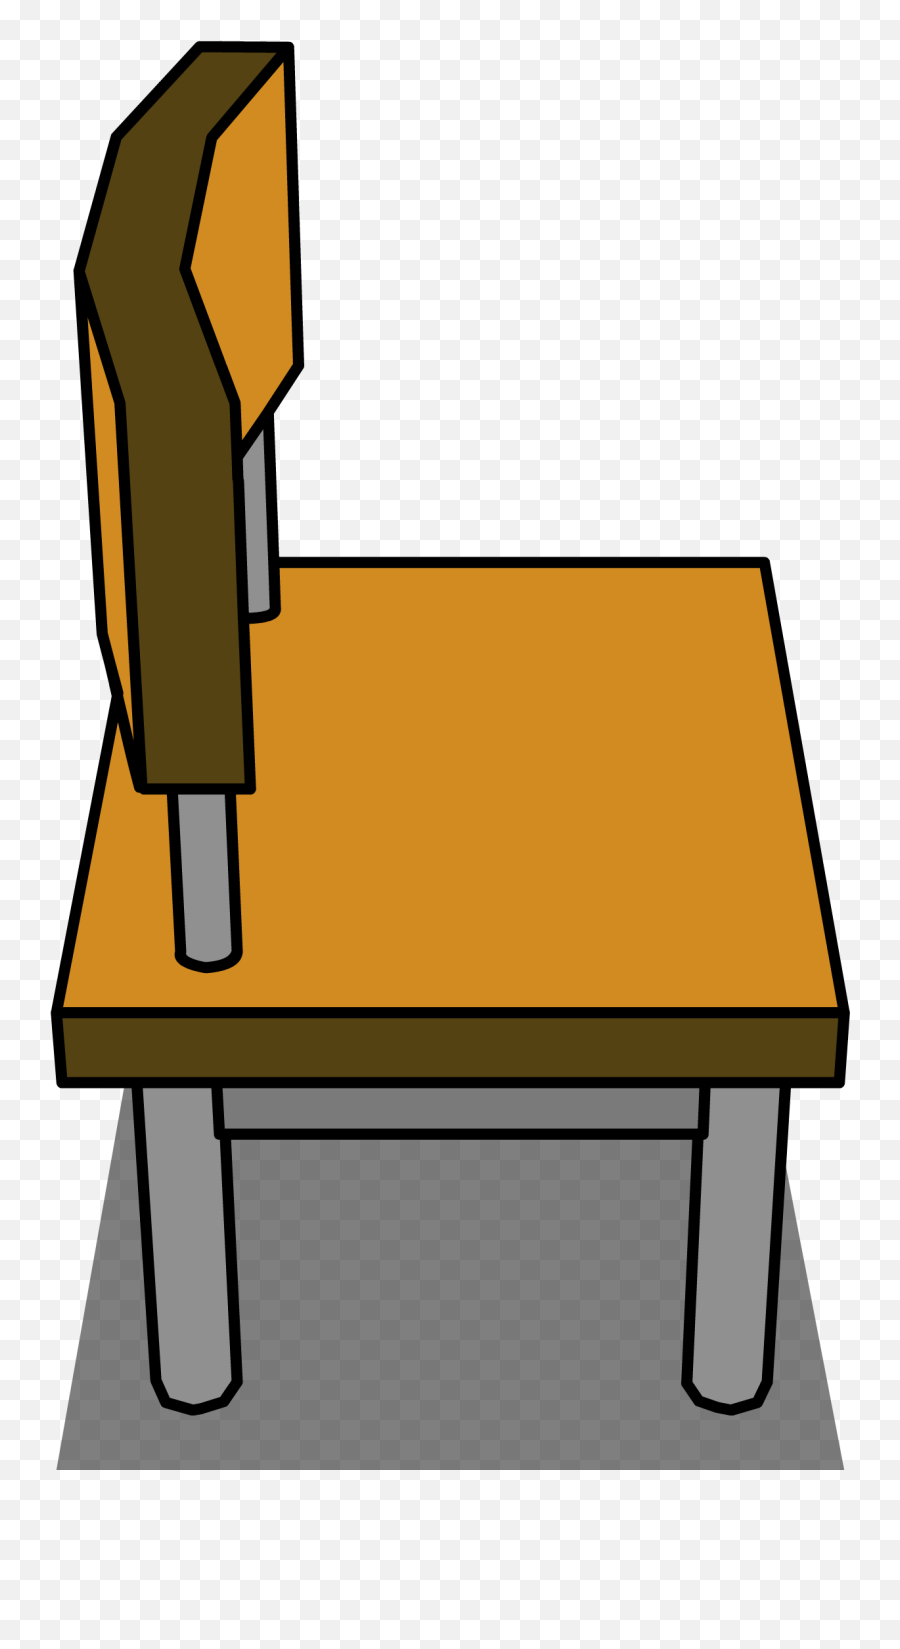 Chair Sprite Png - Chair Sprite,School Chair Png